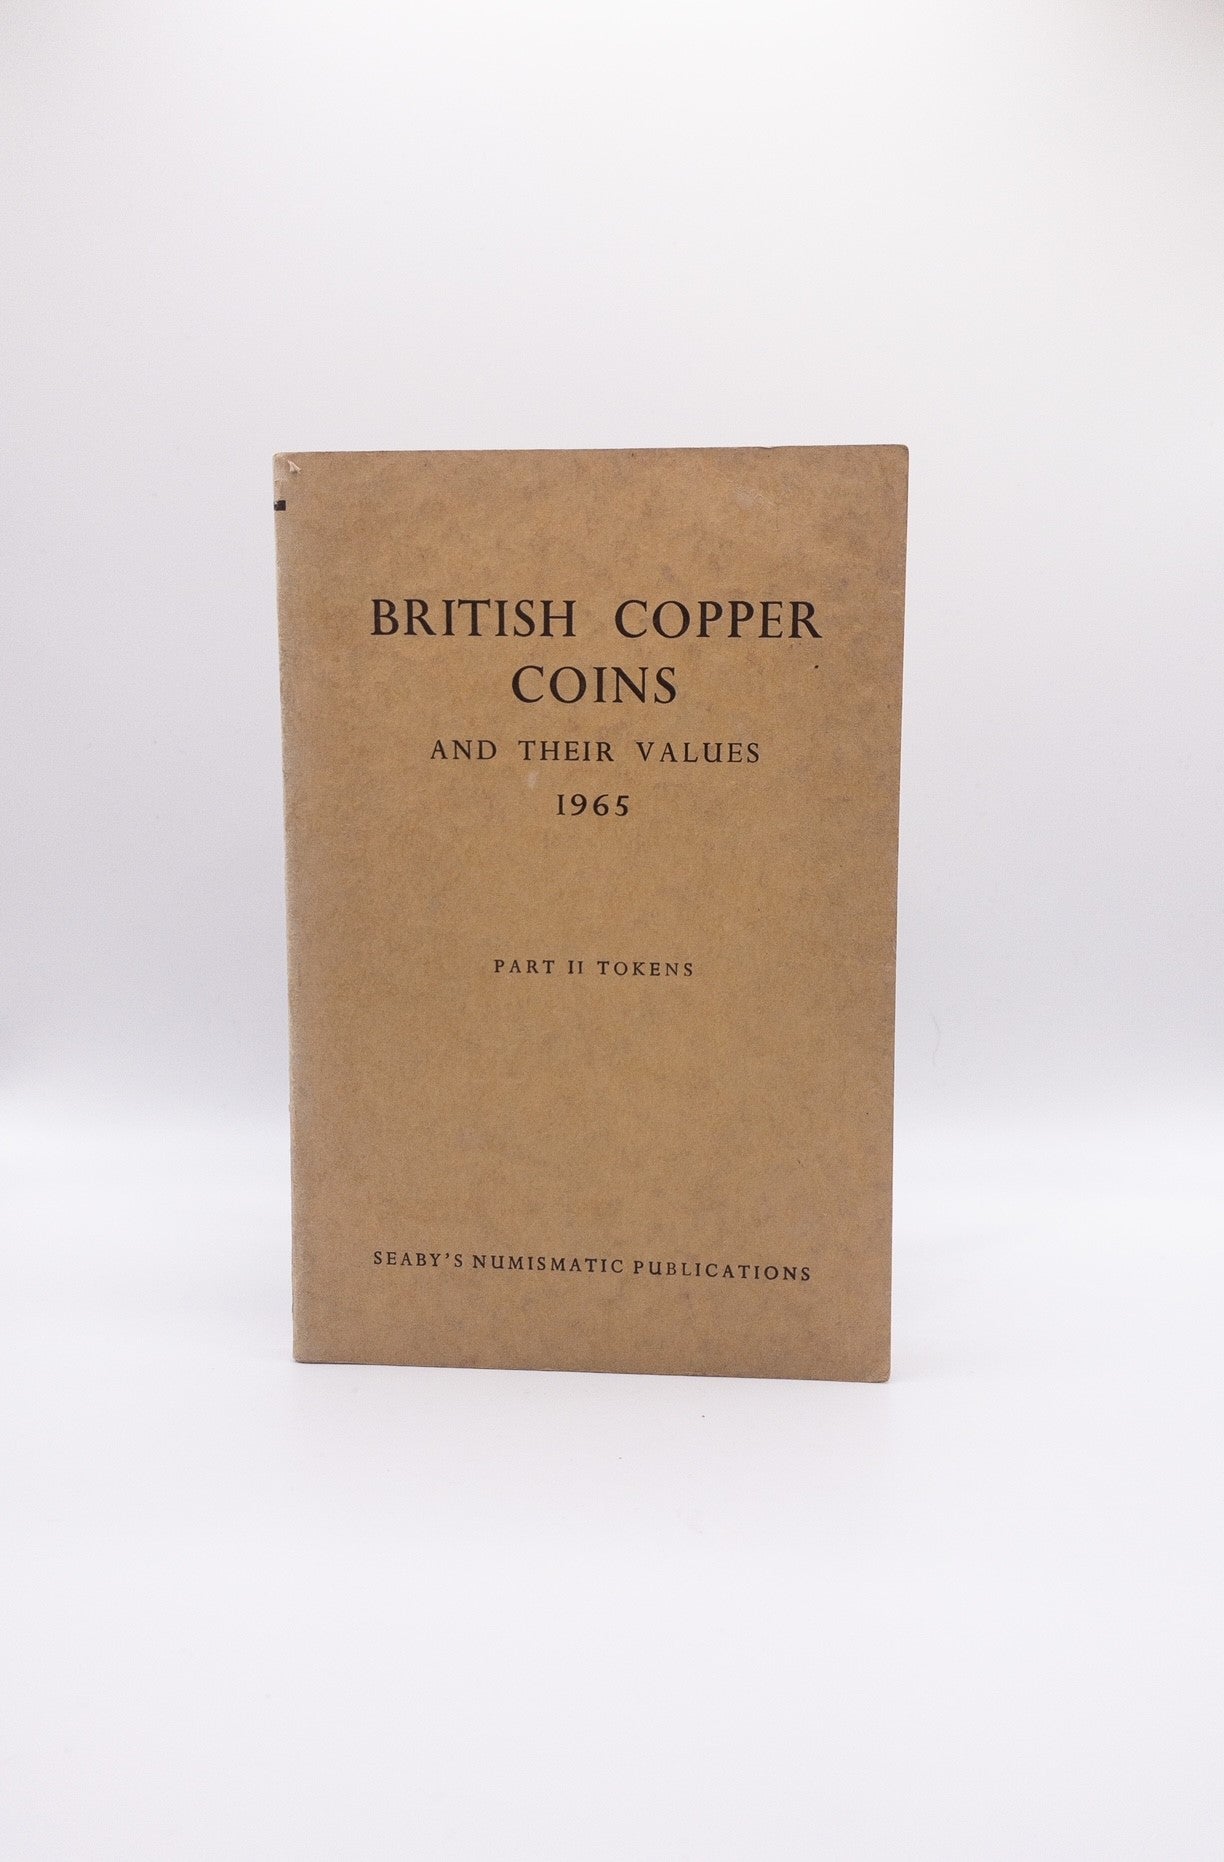 British Copper Coins and Their Values 1965: Part II: Tokens edited by H. A. Seaby and Monica Bussell